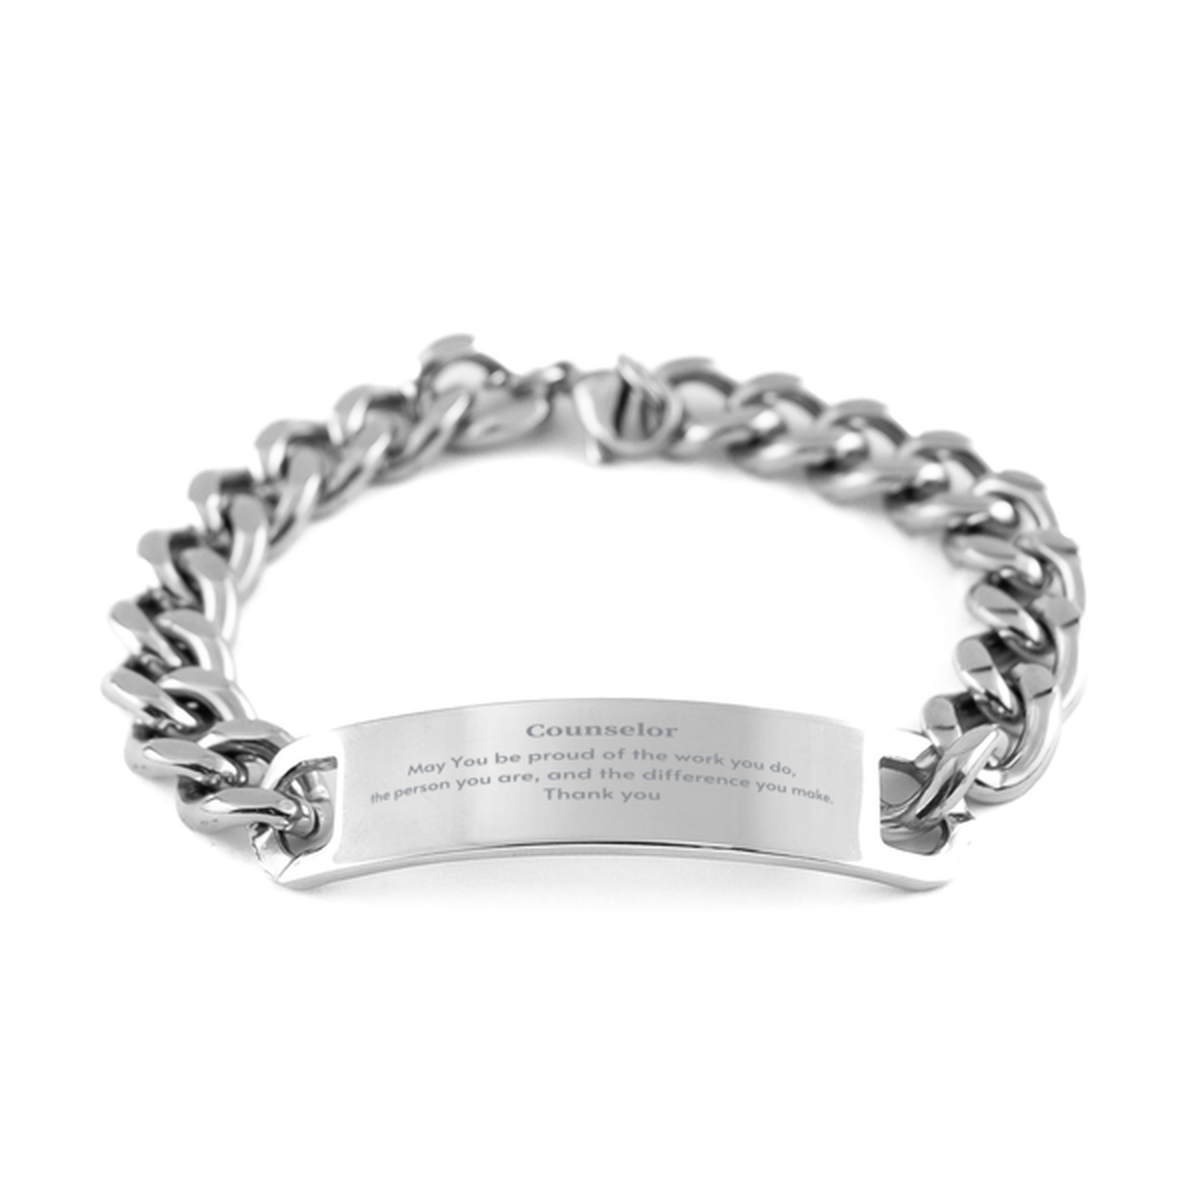 Heartwarming Cuban Chain Stainless Steel Bracelet Retirement Coworkers Gifts for Counselor, Counselor May You be proud of the work you do, the person you are Gifts for Boss Men Women Friends